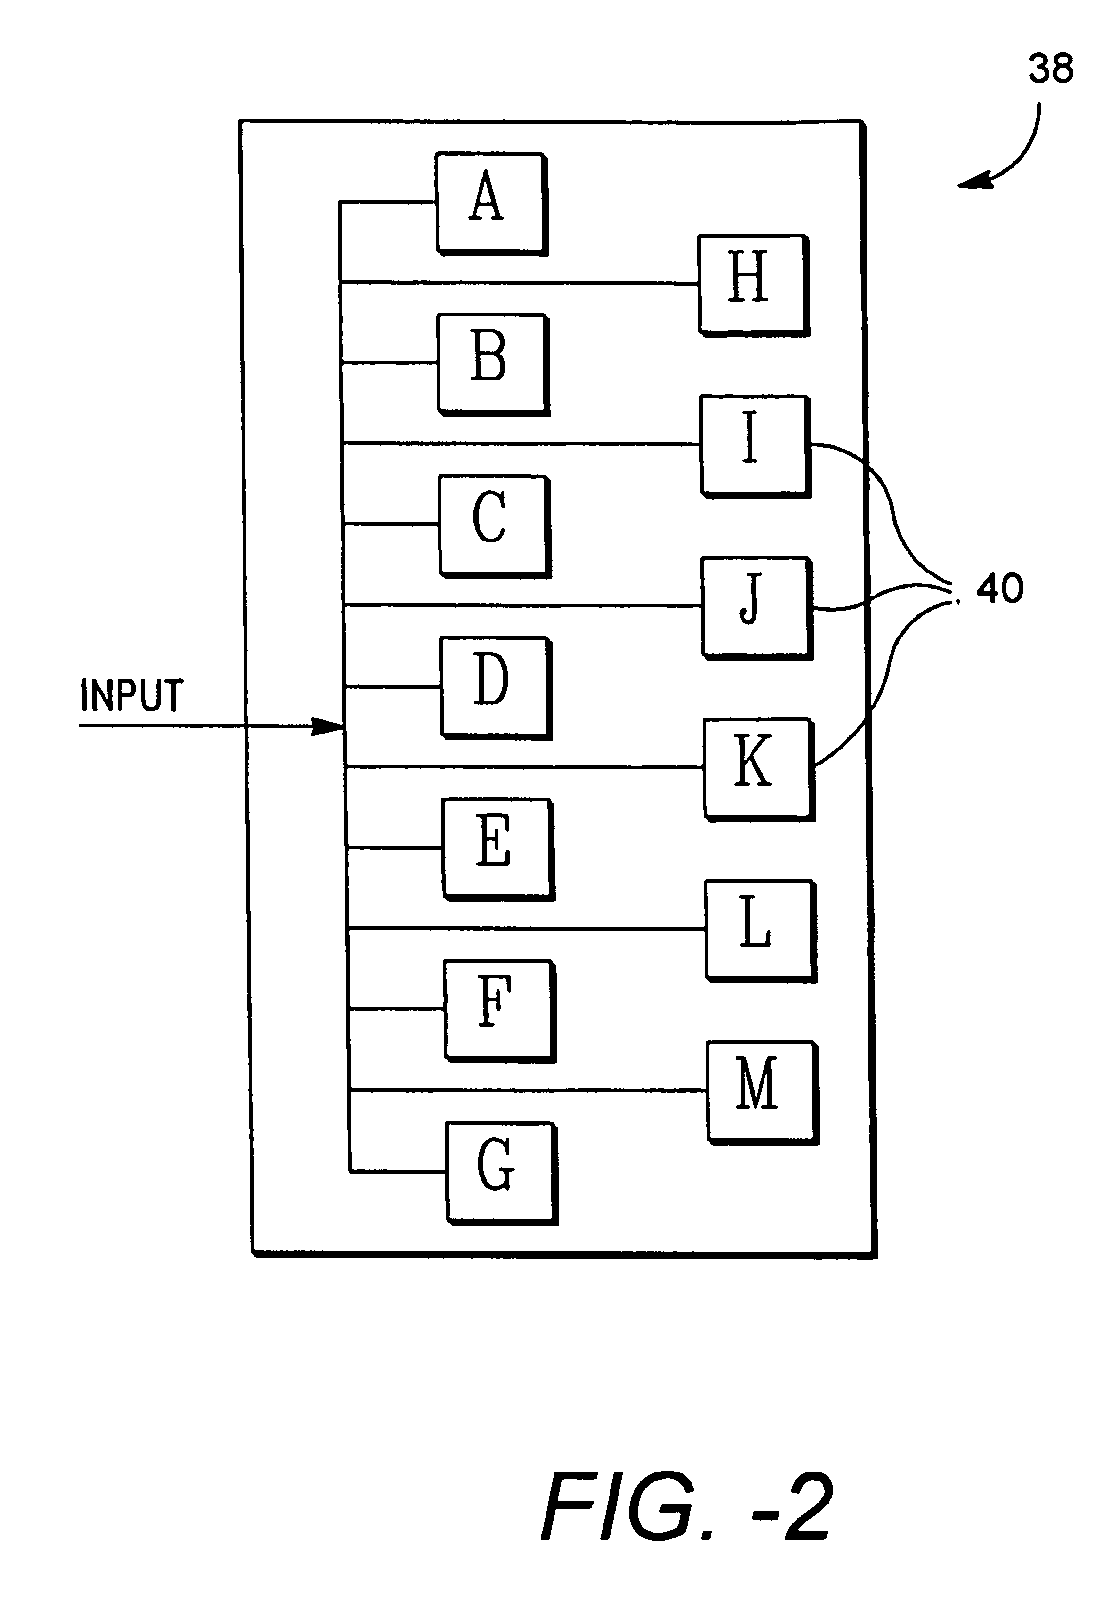 Method and system for processing neuro-electrical waveform signals